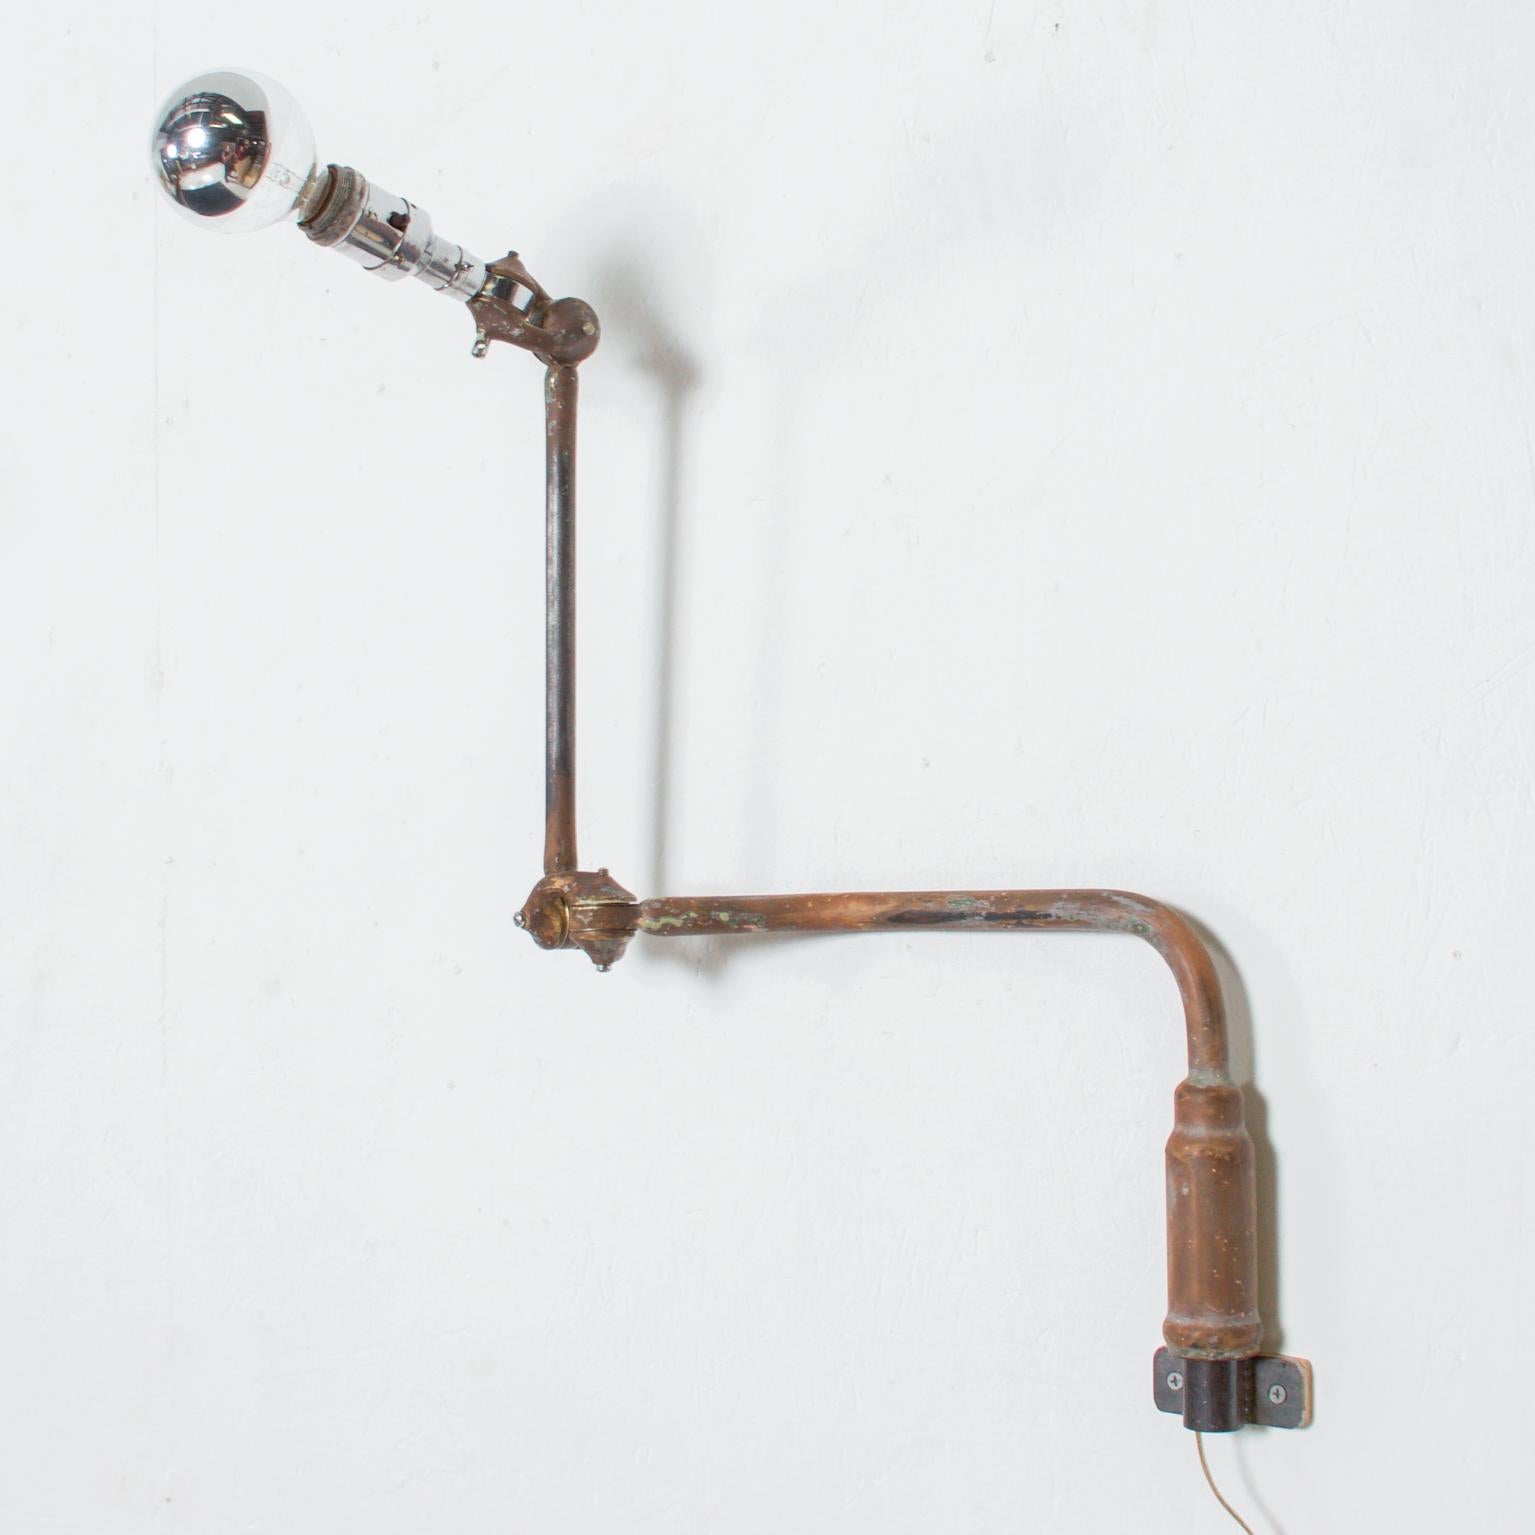   1940s Faries Industrial Wall Sconce Medical Adjustable Lamp  In Good Condition For Sale In Chula Vista, CA